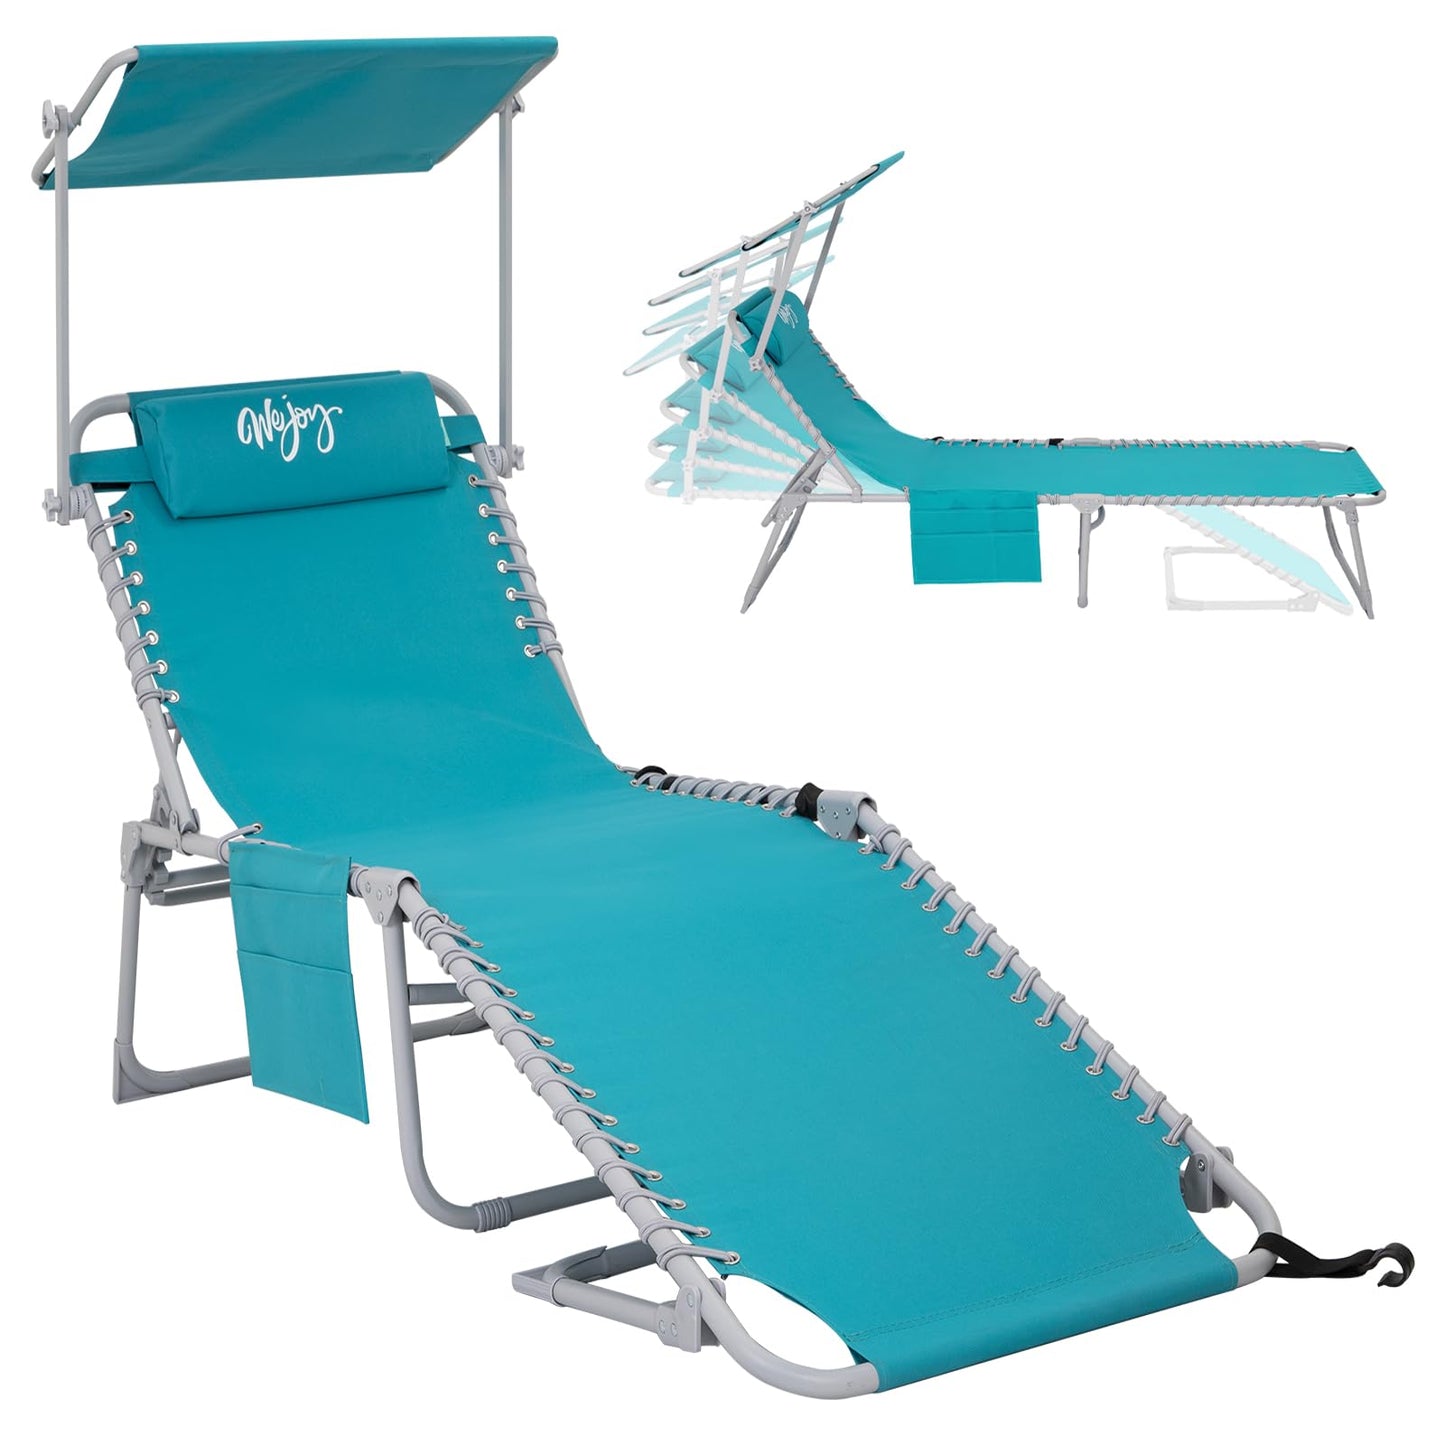 WEJOY Classic Portable Lounge Chair with Canopy Sun Shade